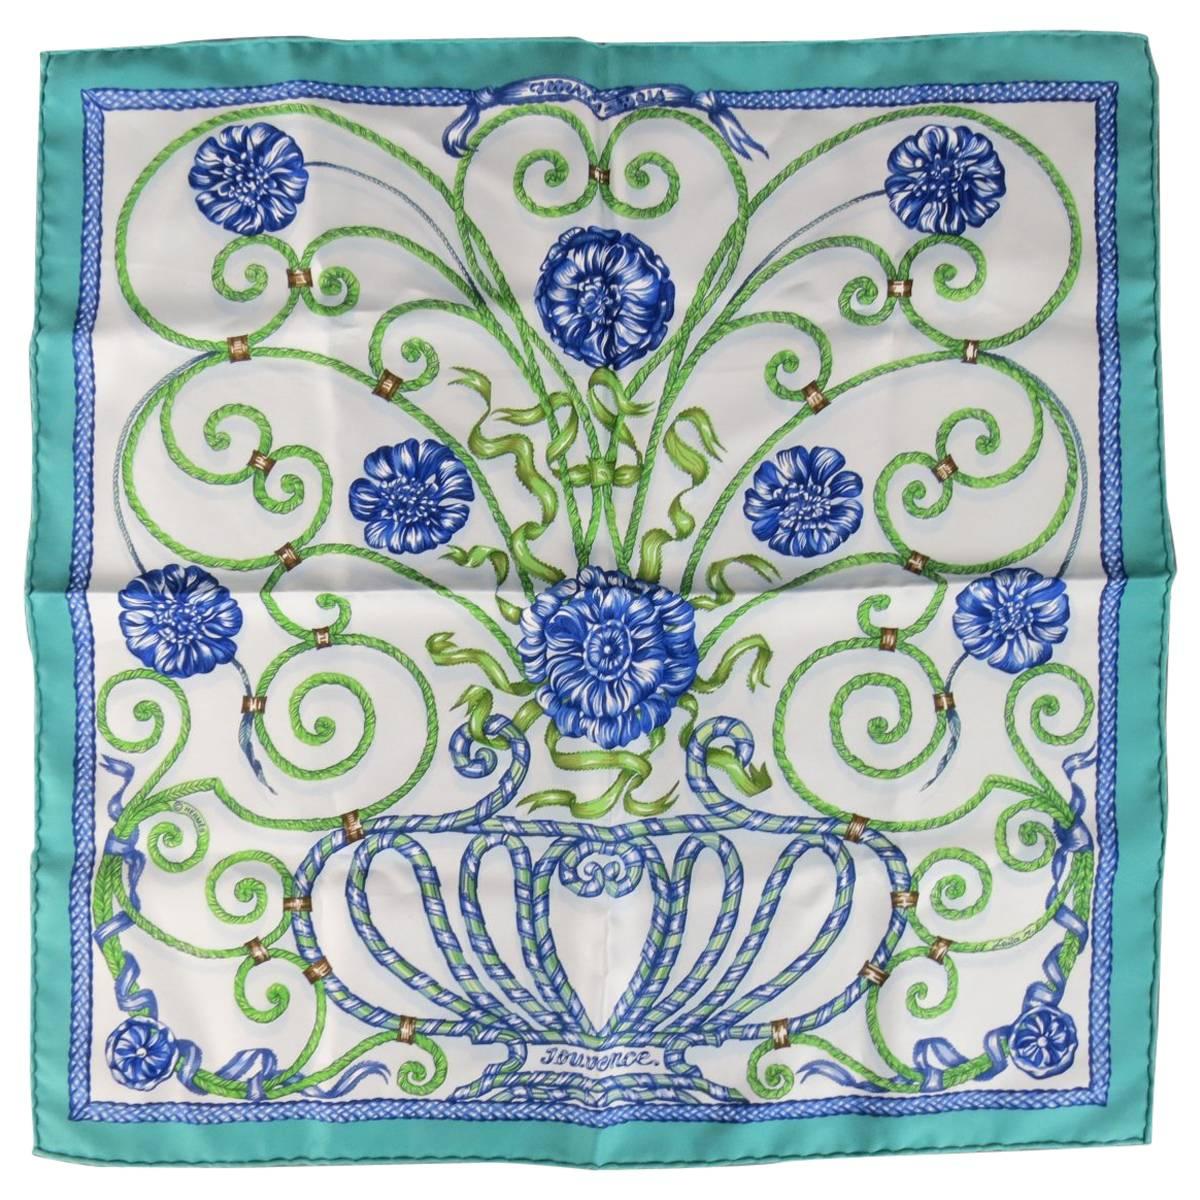 HERMES Turquoise & Navy 'Jouvence' Floral Silk Pocket Square